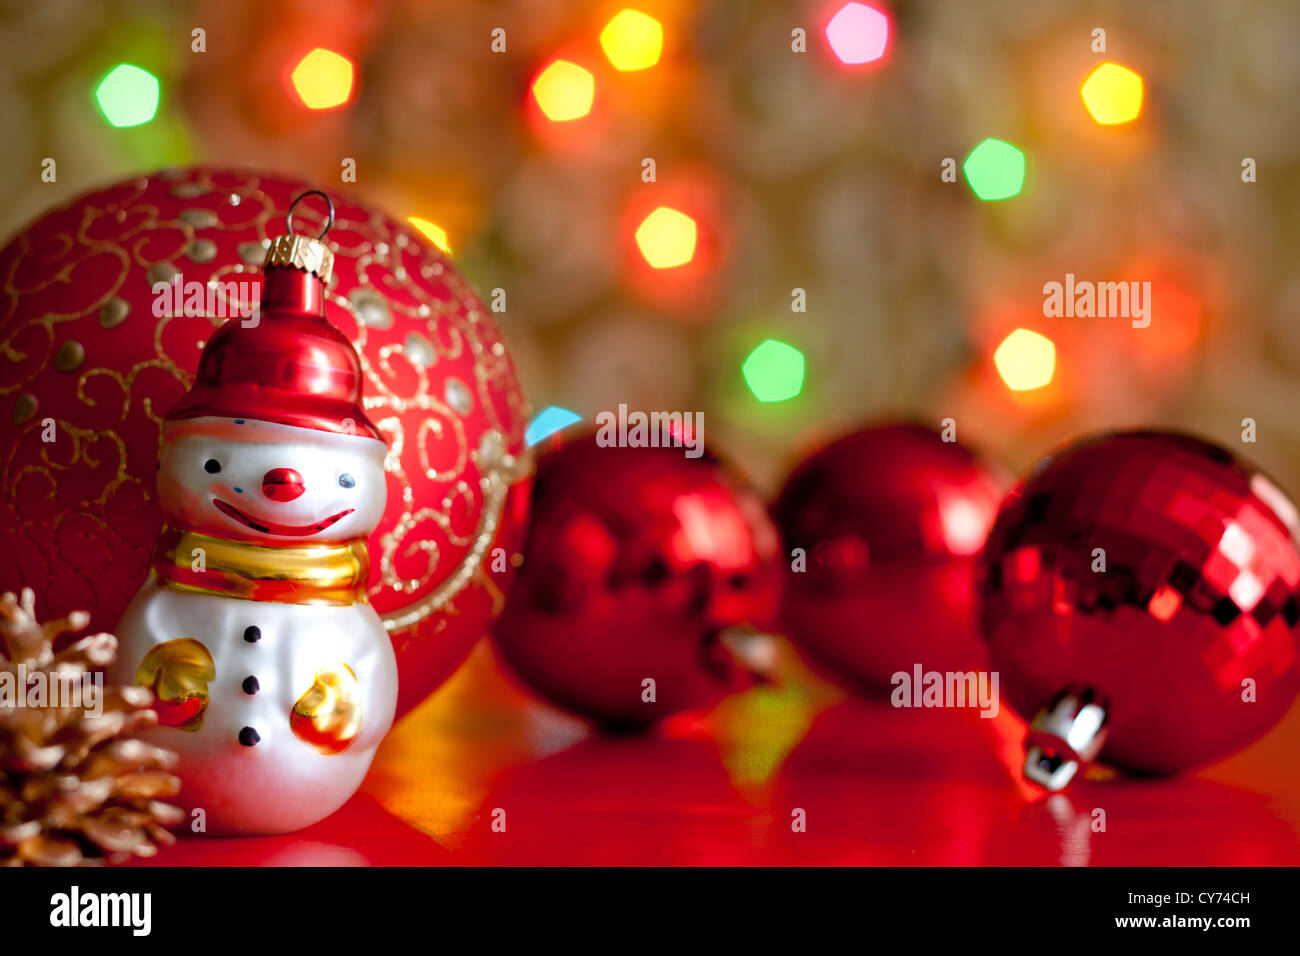 Snow man and baubles against blurred colorful background Stock Photo